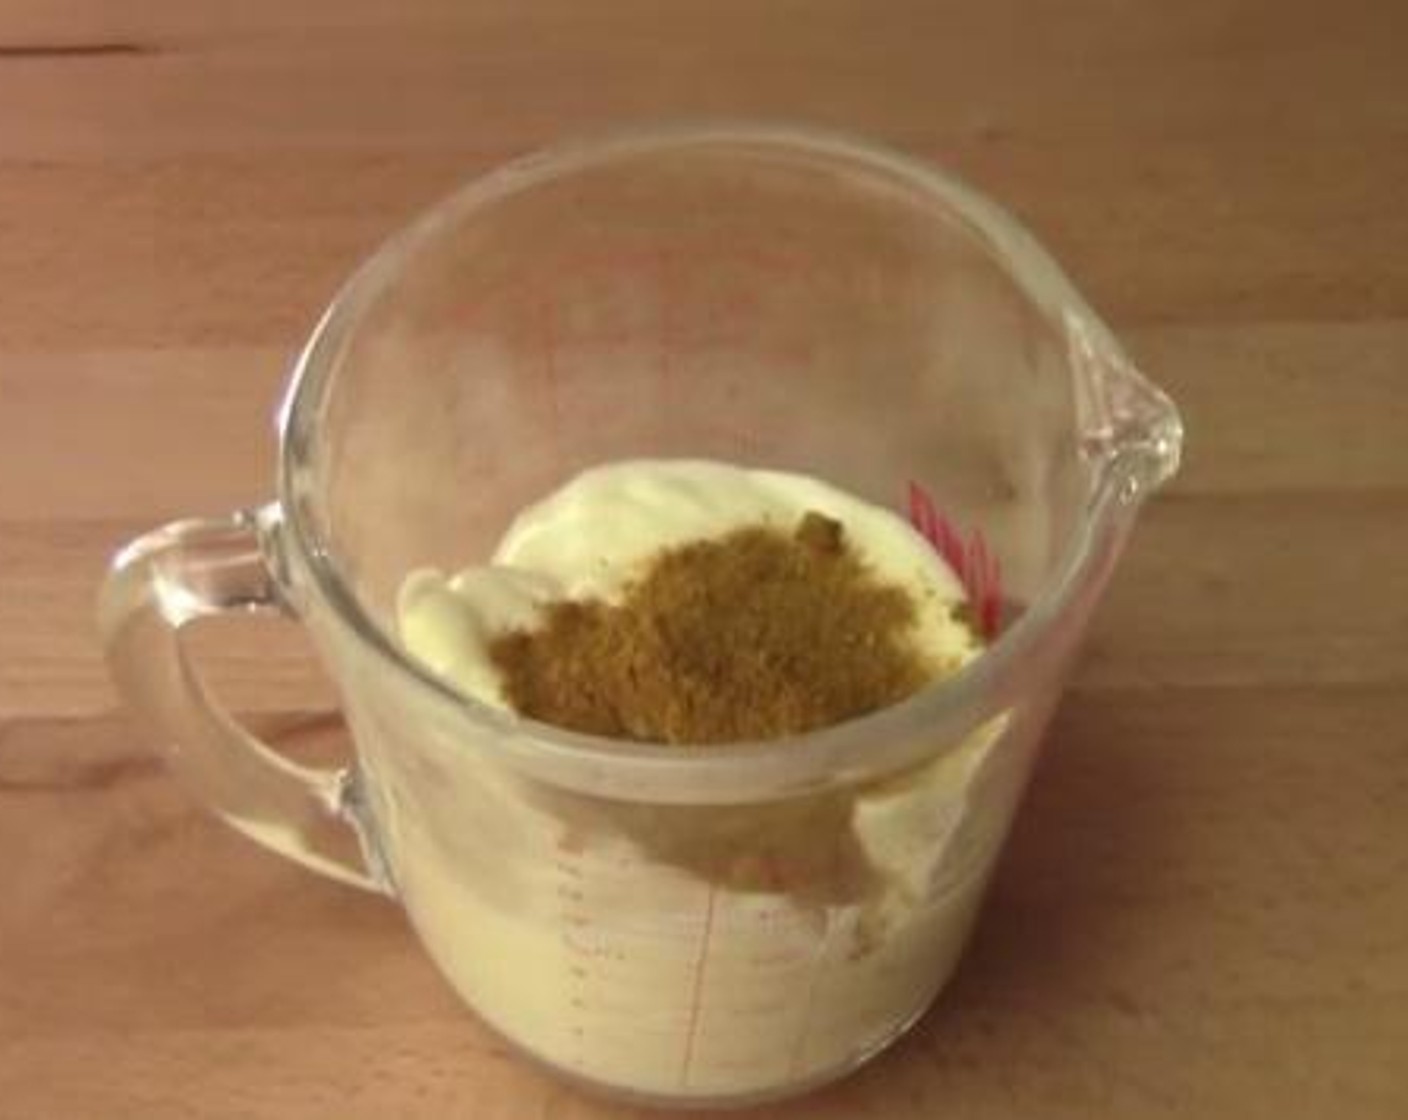 step 2 Inside a cup, mix together the Mayonnaise (1 cup), and Curry Powder (1 tsp).